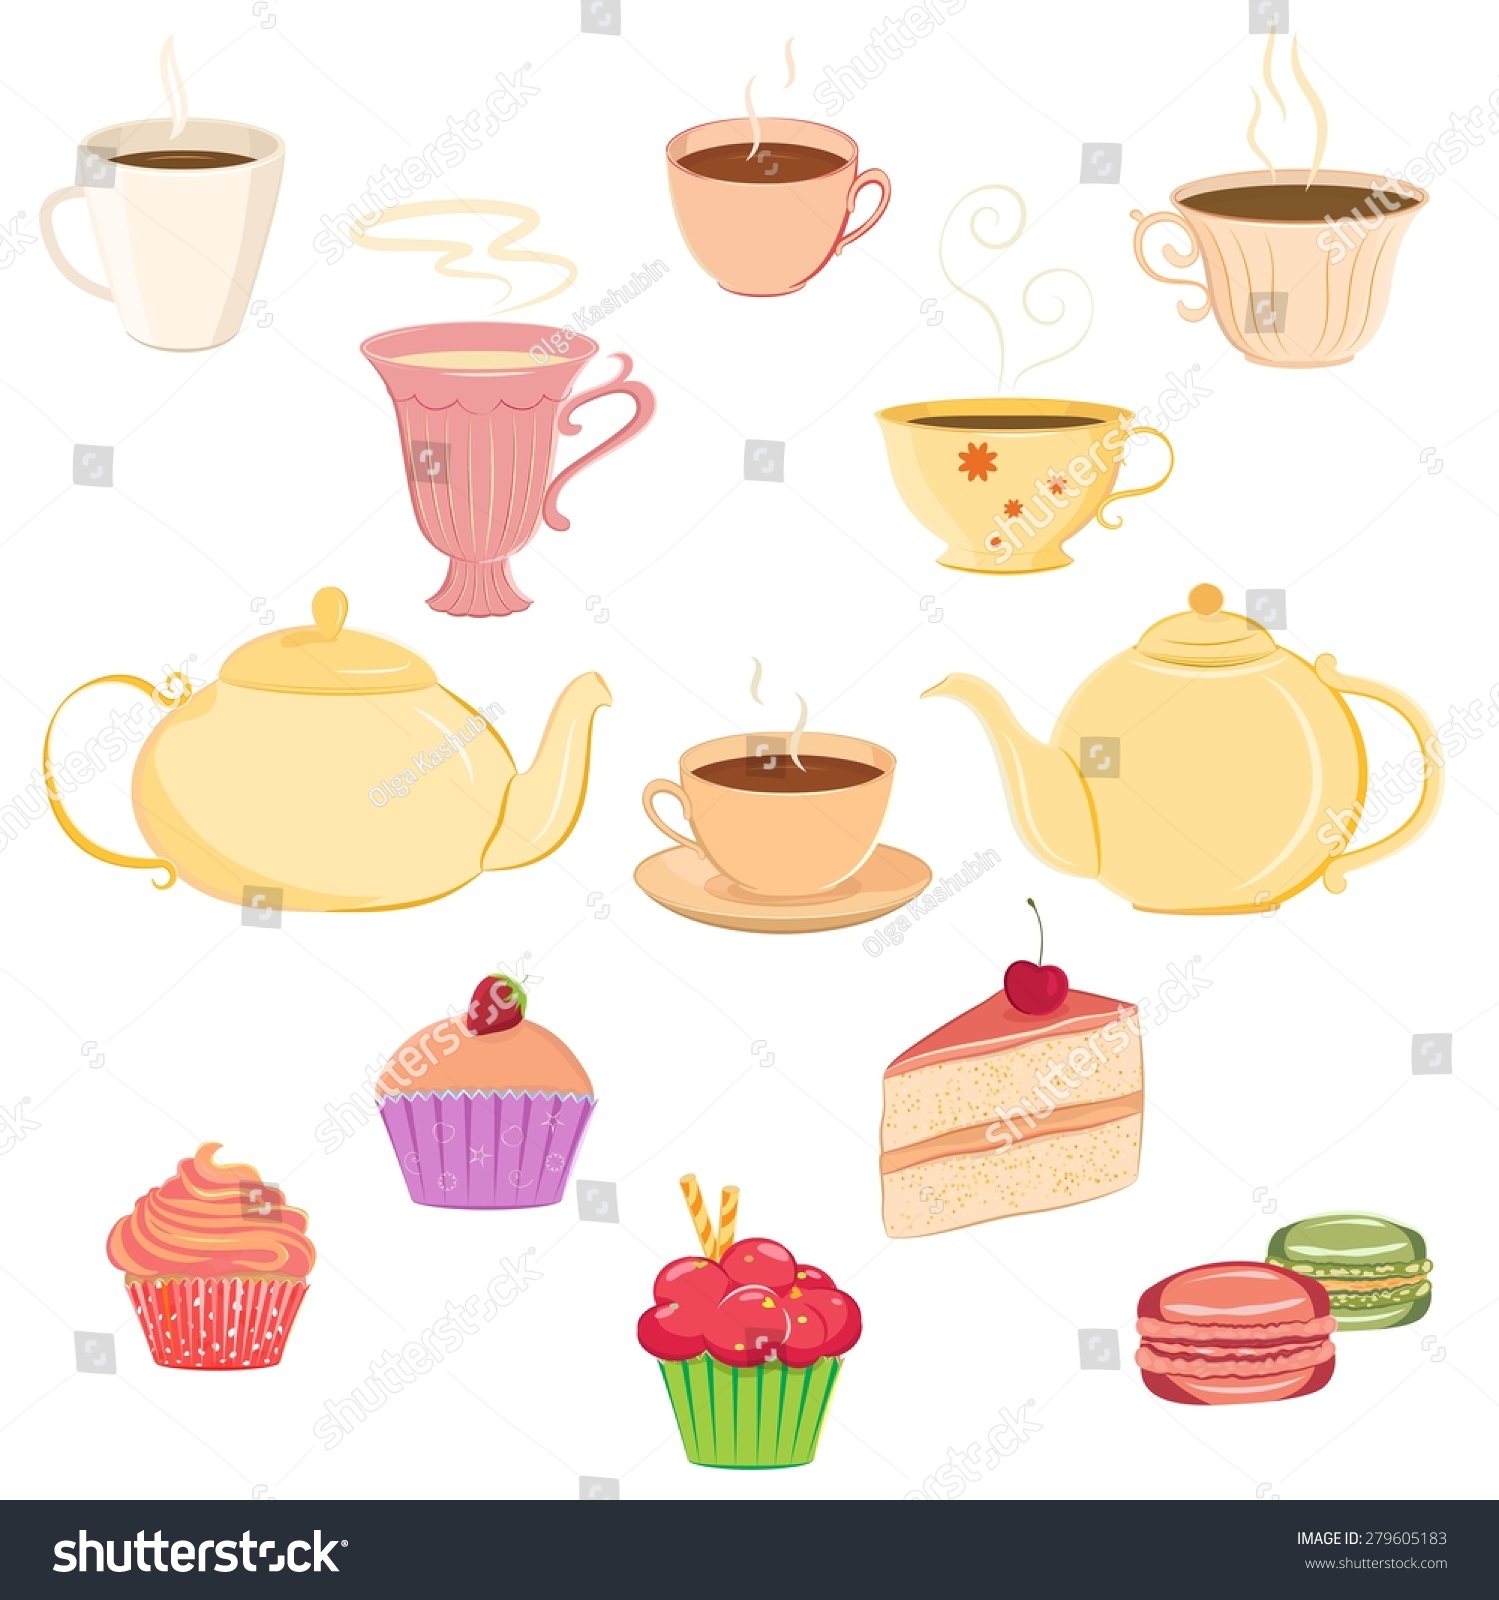 Vector collection of hand drawn teacups, teapots and sweets. Unique and elegant set for website, digital scrapbook and cafe or restaurant design. Separate elements could be used as icons #279605183